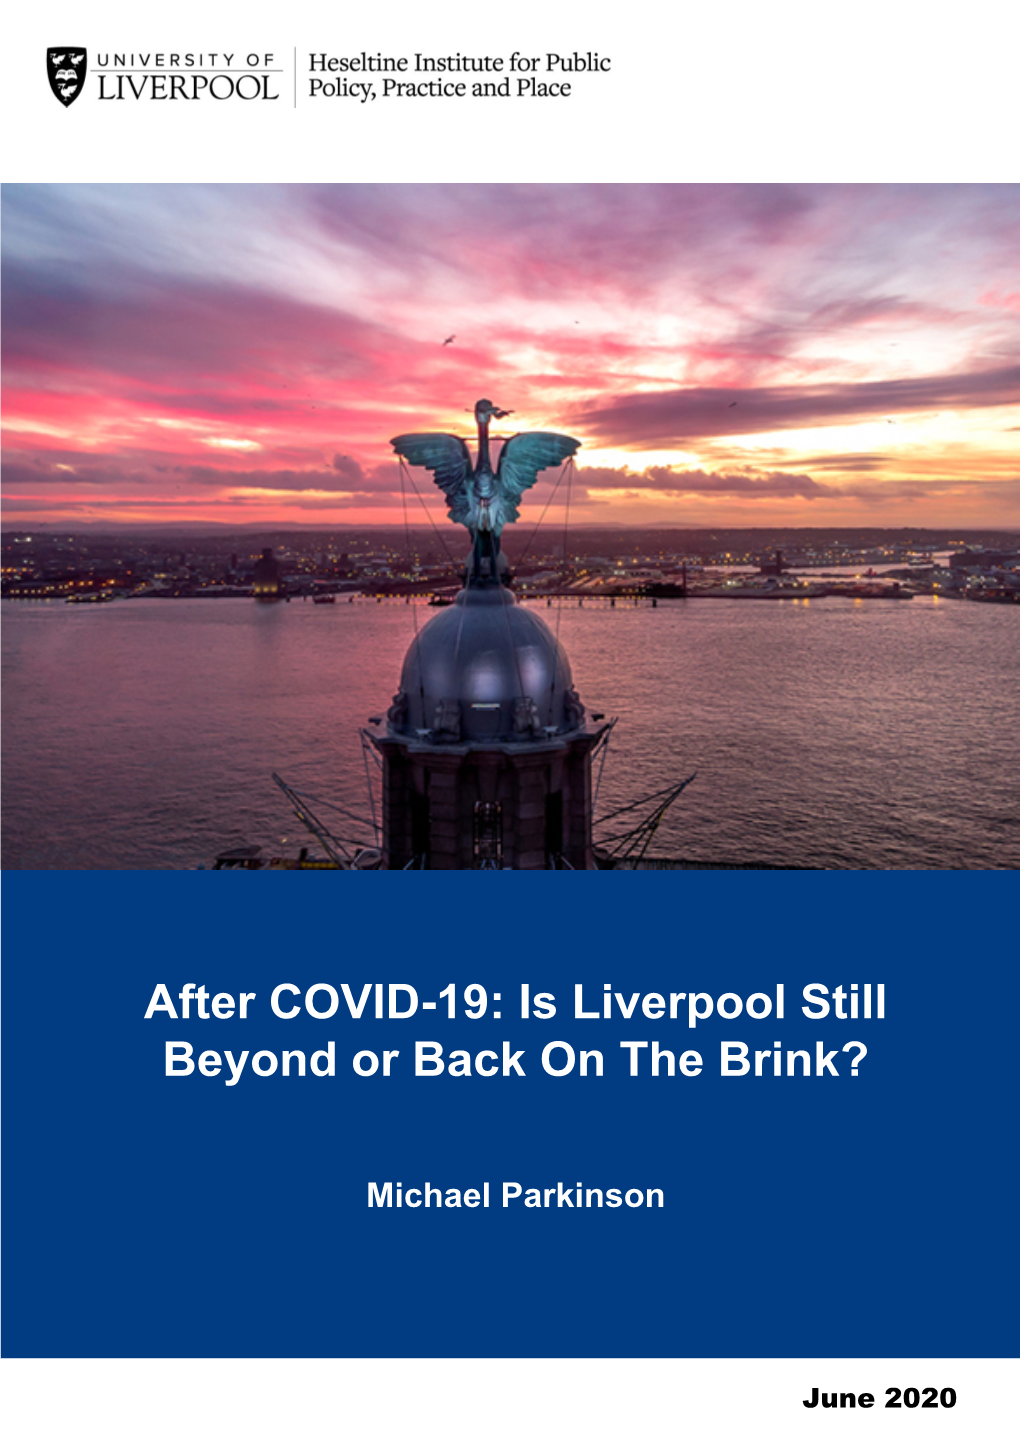 After COVID-19: Is Liverpool Still Beyond Or Back on the Brink?